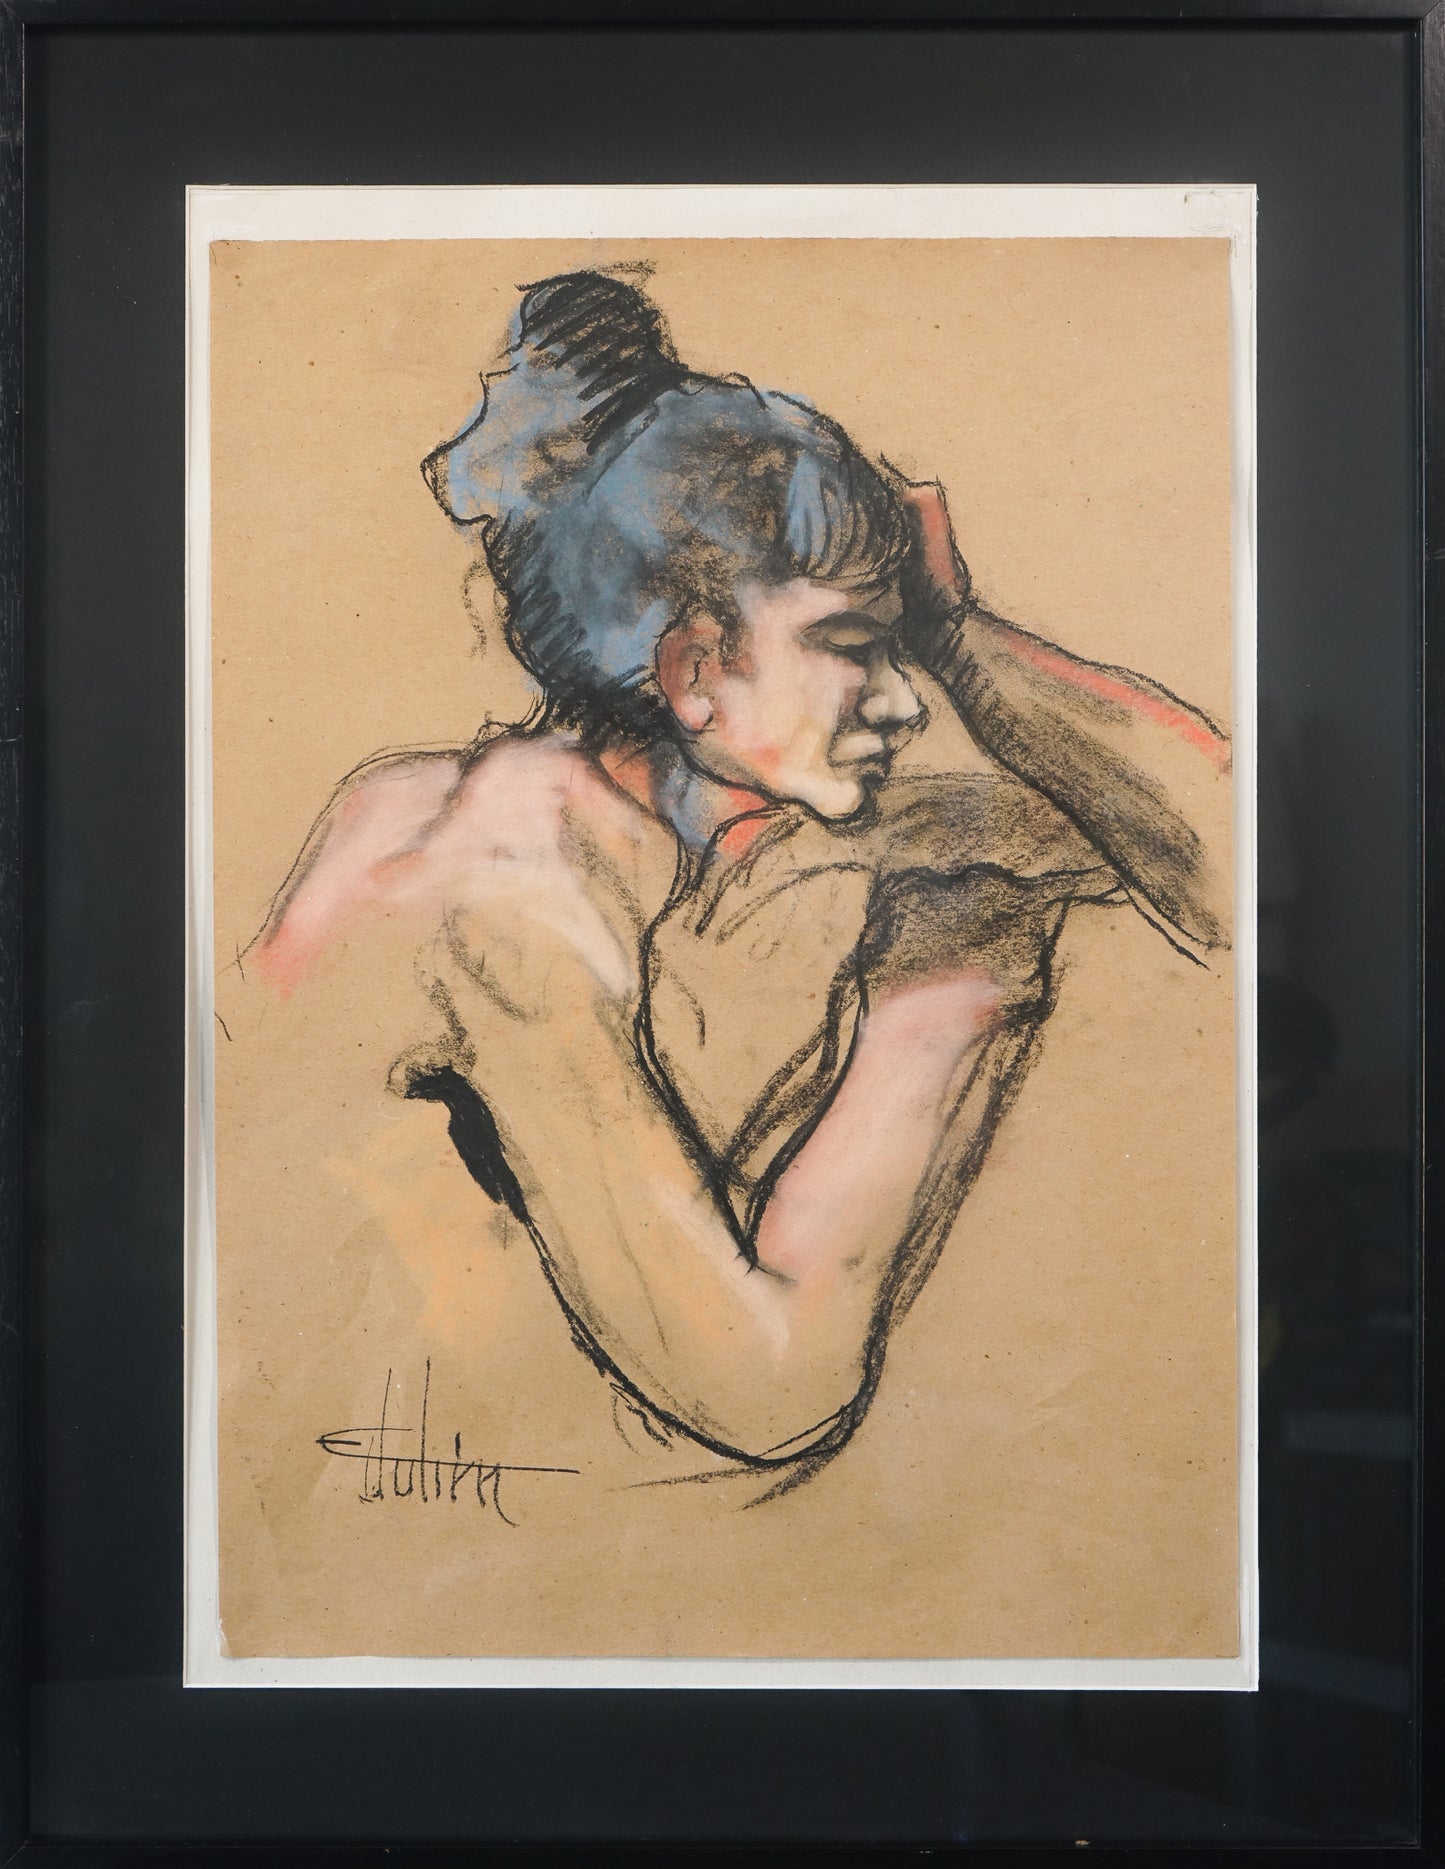 German Expressionist- Follower - Life Sketch of a Lady